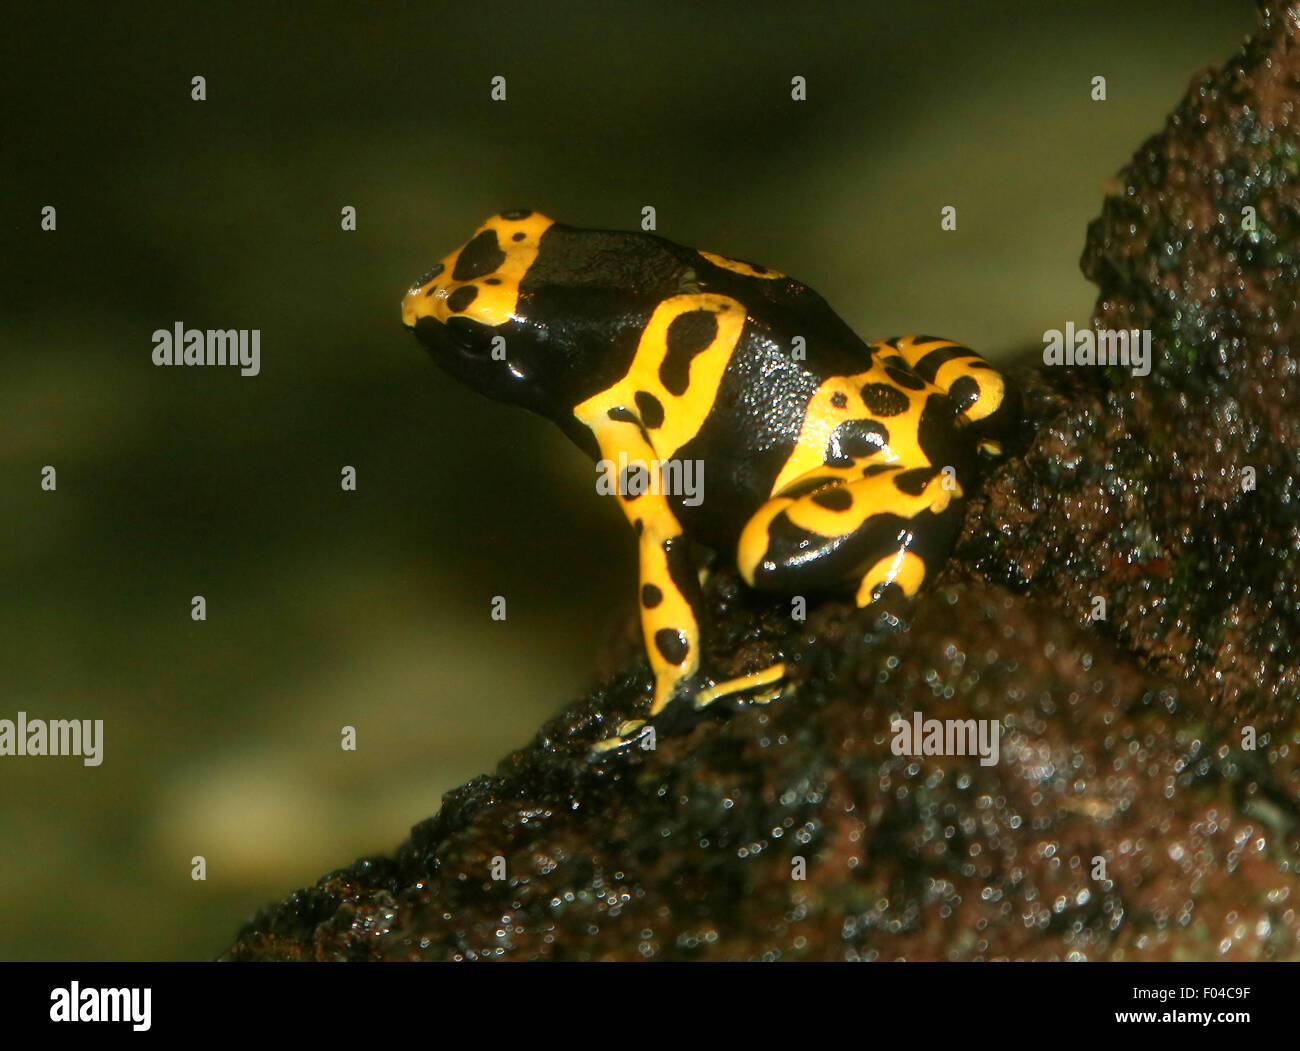 South American Yellow banded or yellow headed poison dart frog (Dendrobates leucomelas), a.k.a. Bumblebee poison frog Stock Photo